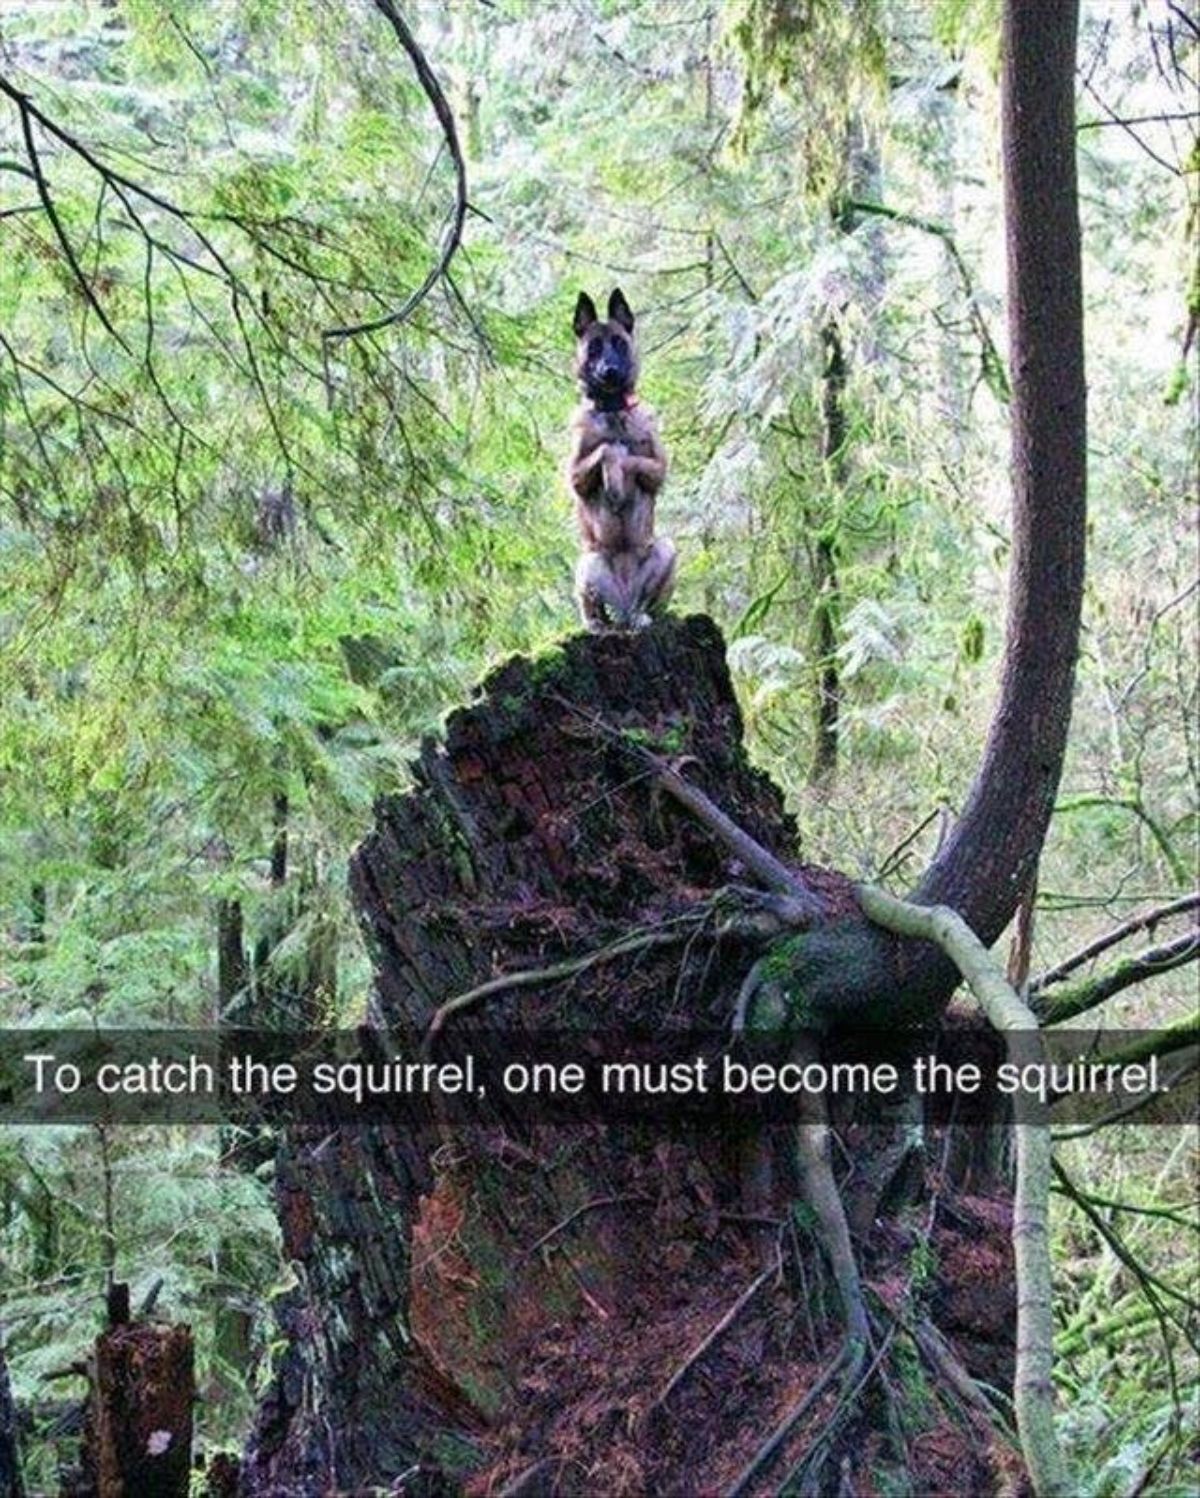 german shepherd perched on a tall rock posing like a squirrel with caption saying To catch the squirrel, one must become he squirrel